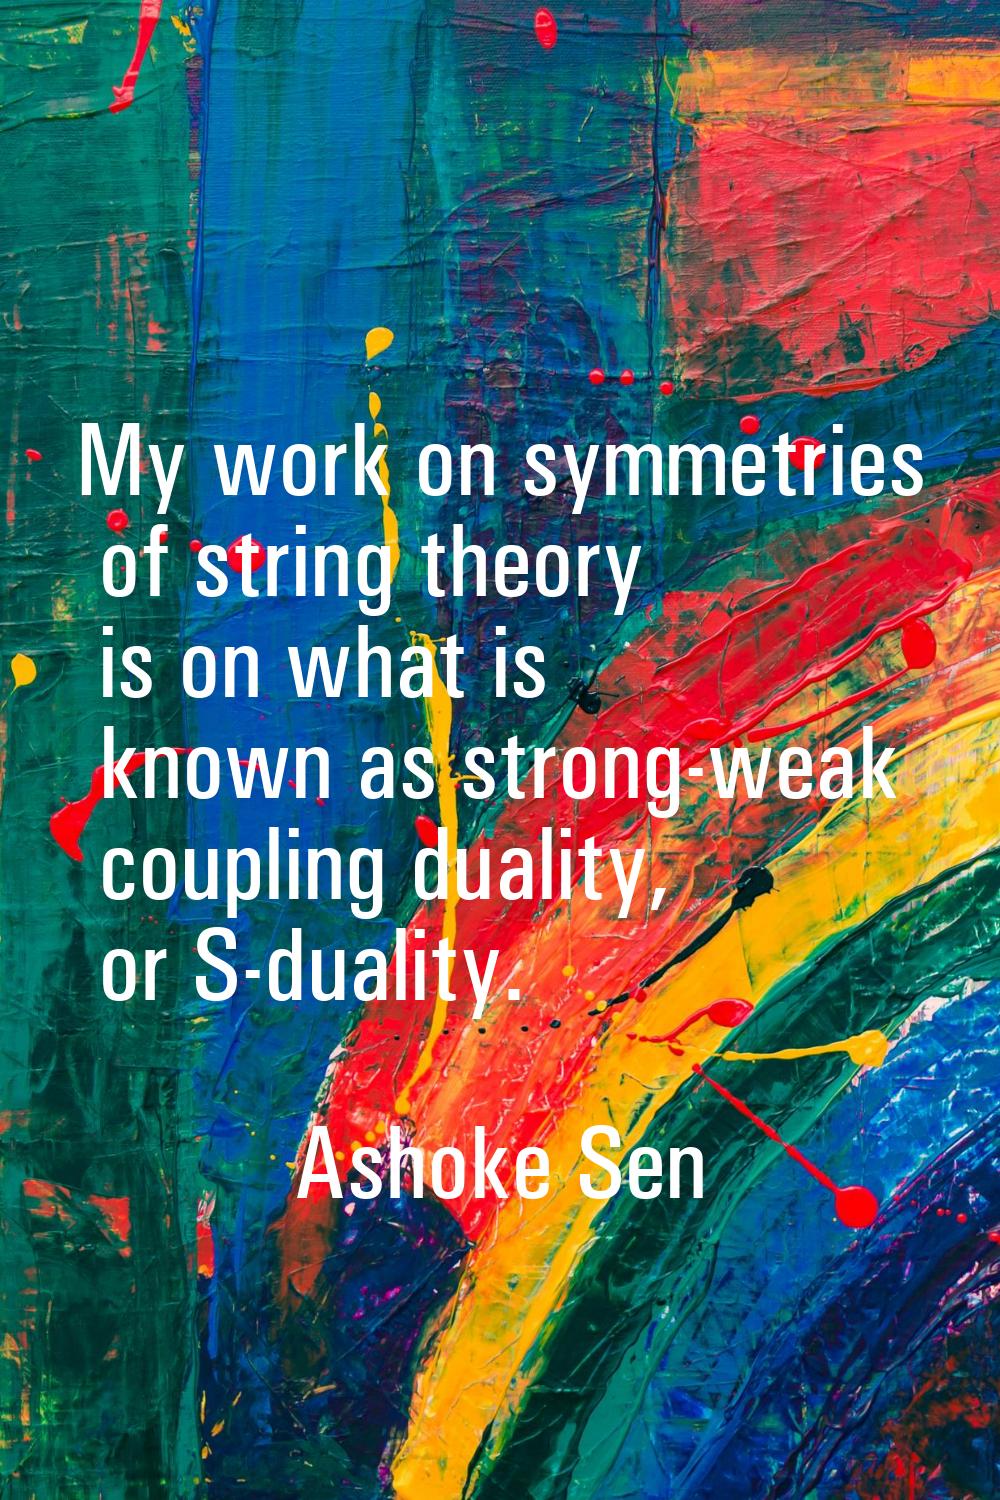 My work on symmetries of string theory is on what is known as strong-weak coupling duality, or S-du